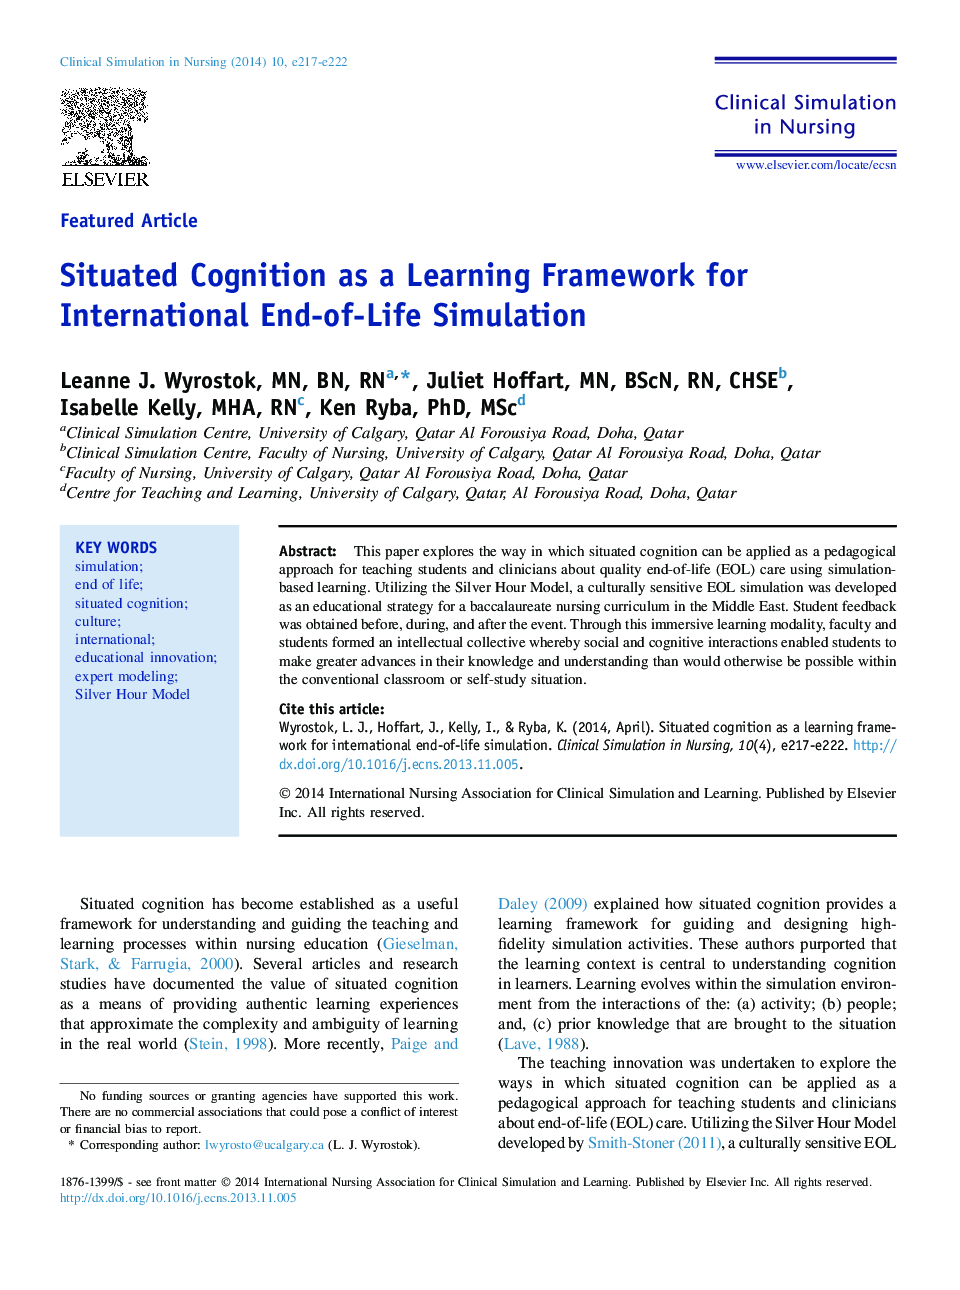 Featured ArticleSituated Cognition as a Learning Framework for International End-of-Life Simulation